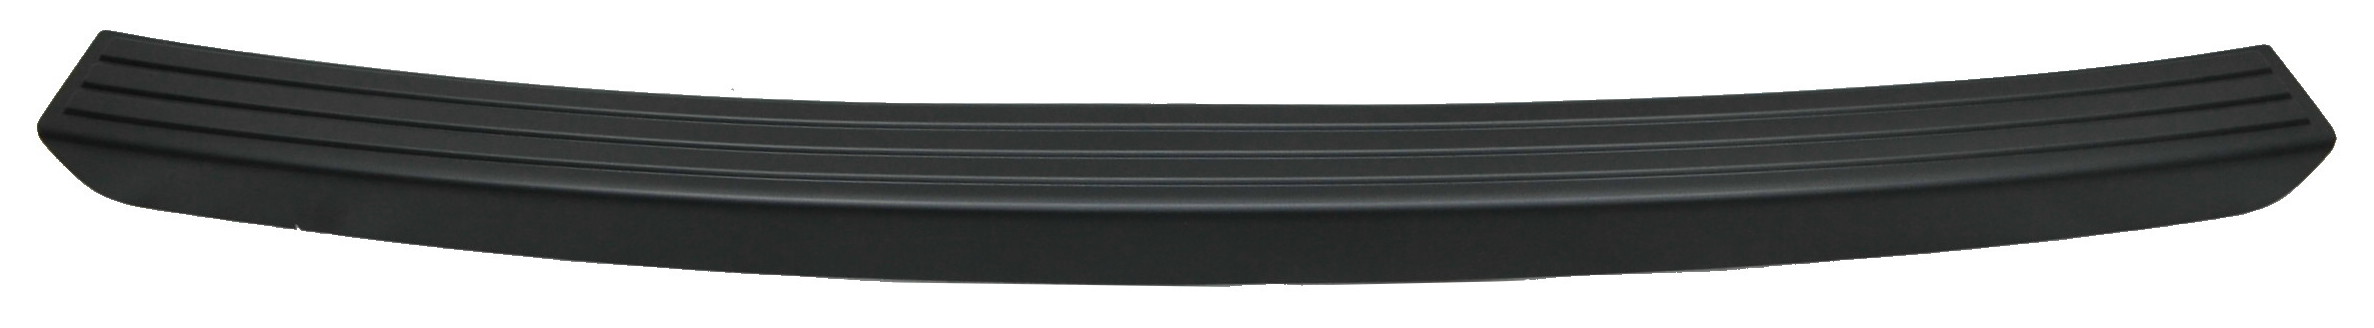 Aftermarket APRON/VALANCE/FILLER PLASTIC for JEEP - COMPASS, COMPASS,11-16,Rear bumper step pad